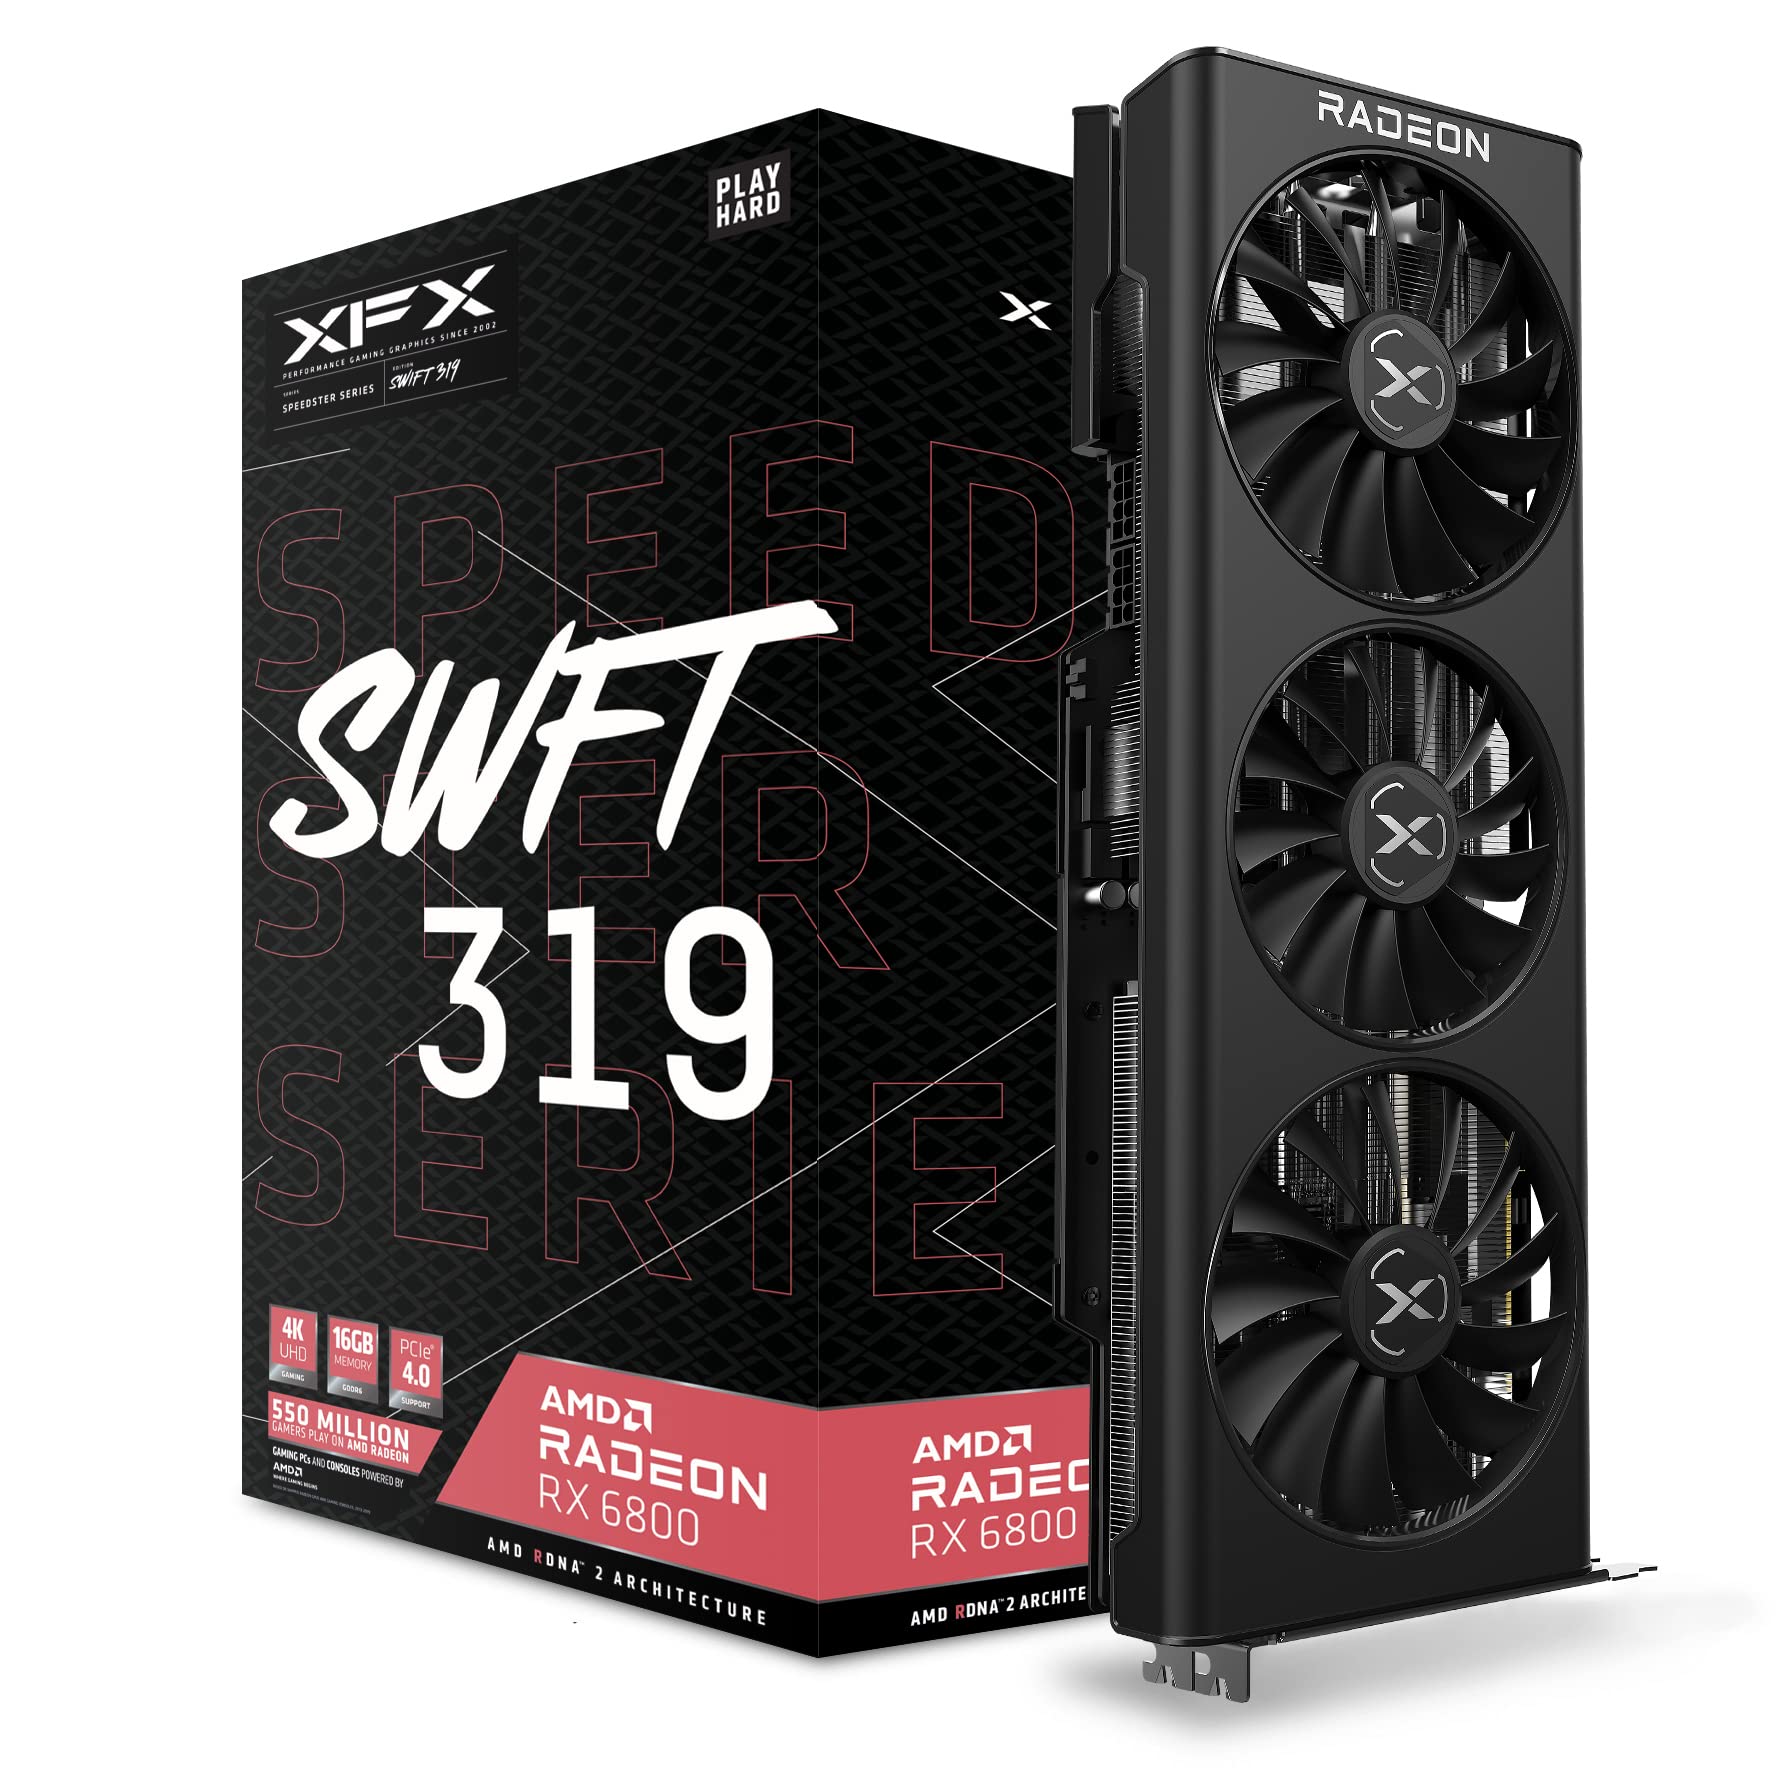 XFX Speedster SWFT319 Radeon RX 6800 16GB GDDR6 Core Gaming Video Card $370 + Free Shipping